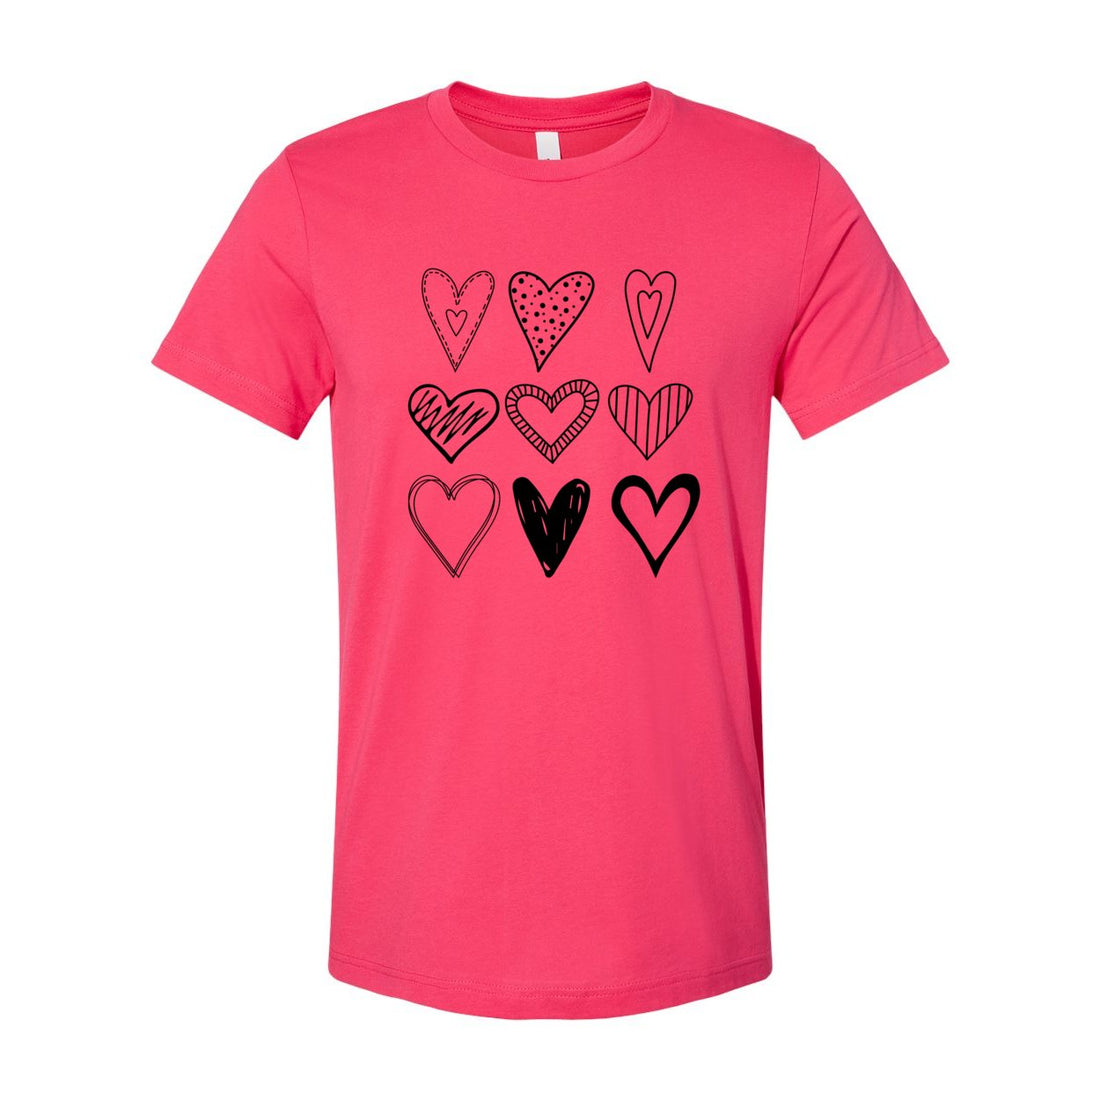 Square Hearts Love Short Sleeve Jersey Tee - T-Shirts - Positively Sassy - Square Hearts Love Short Sleeve Jersey Tee